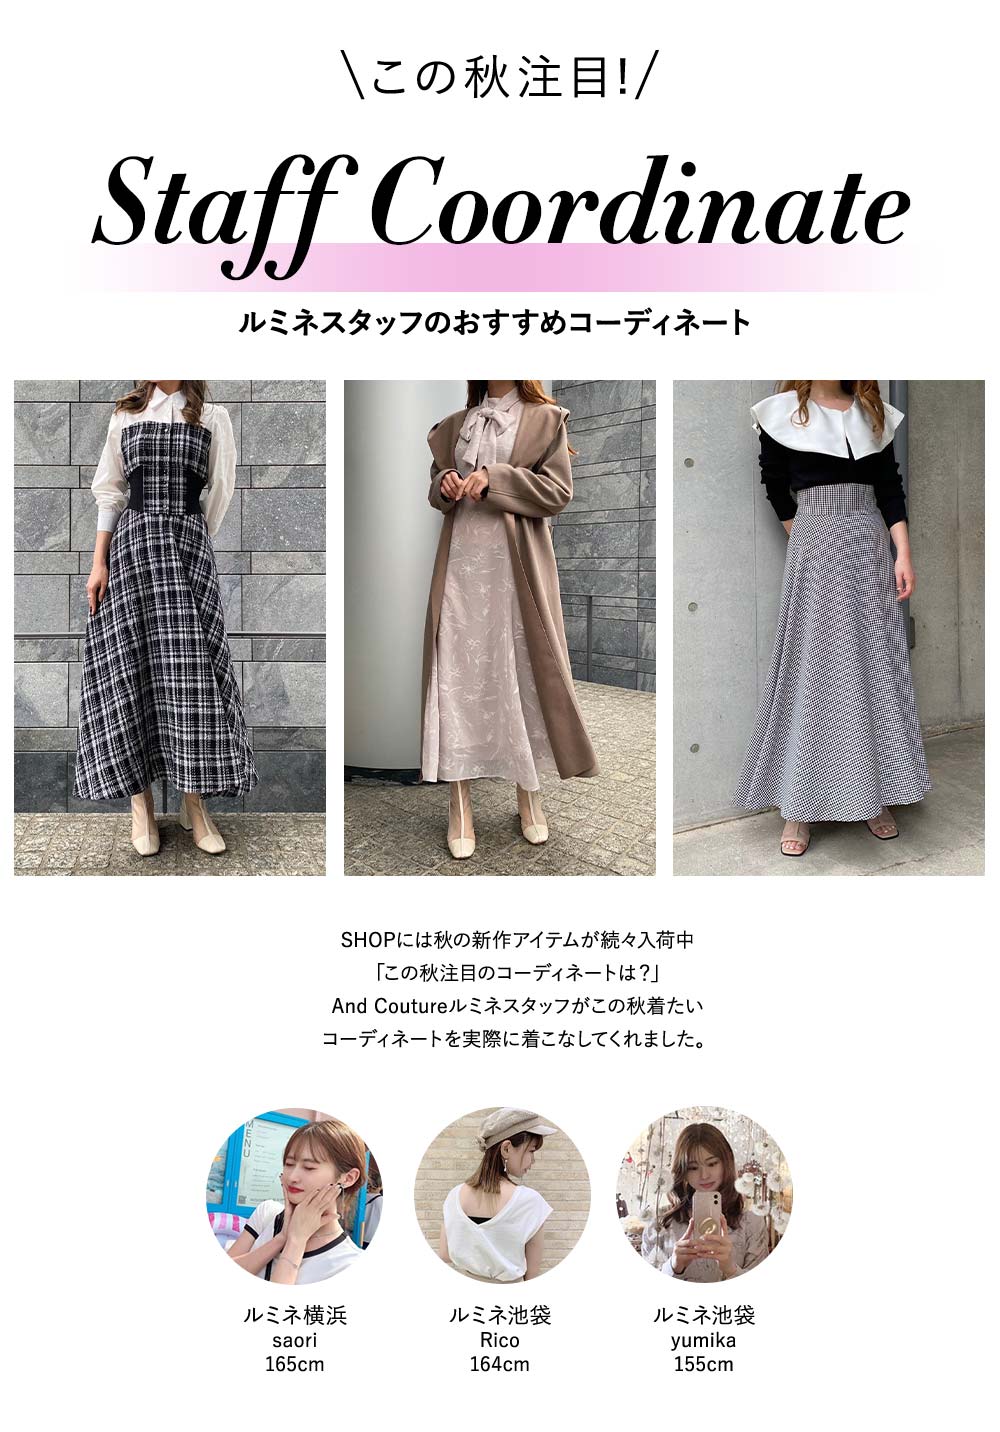 AndCouture スタッフコーディネート